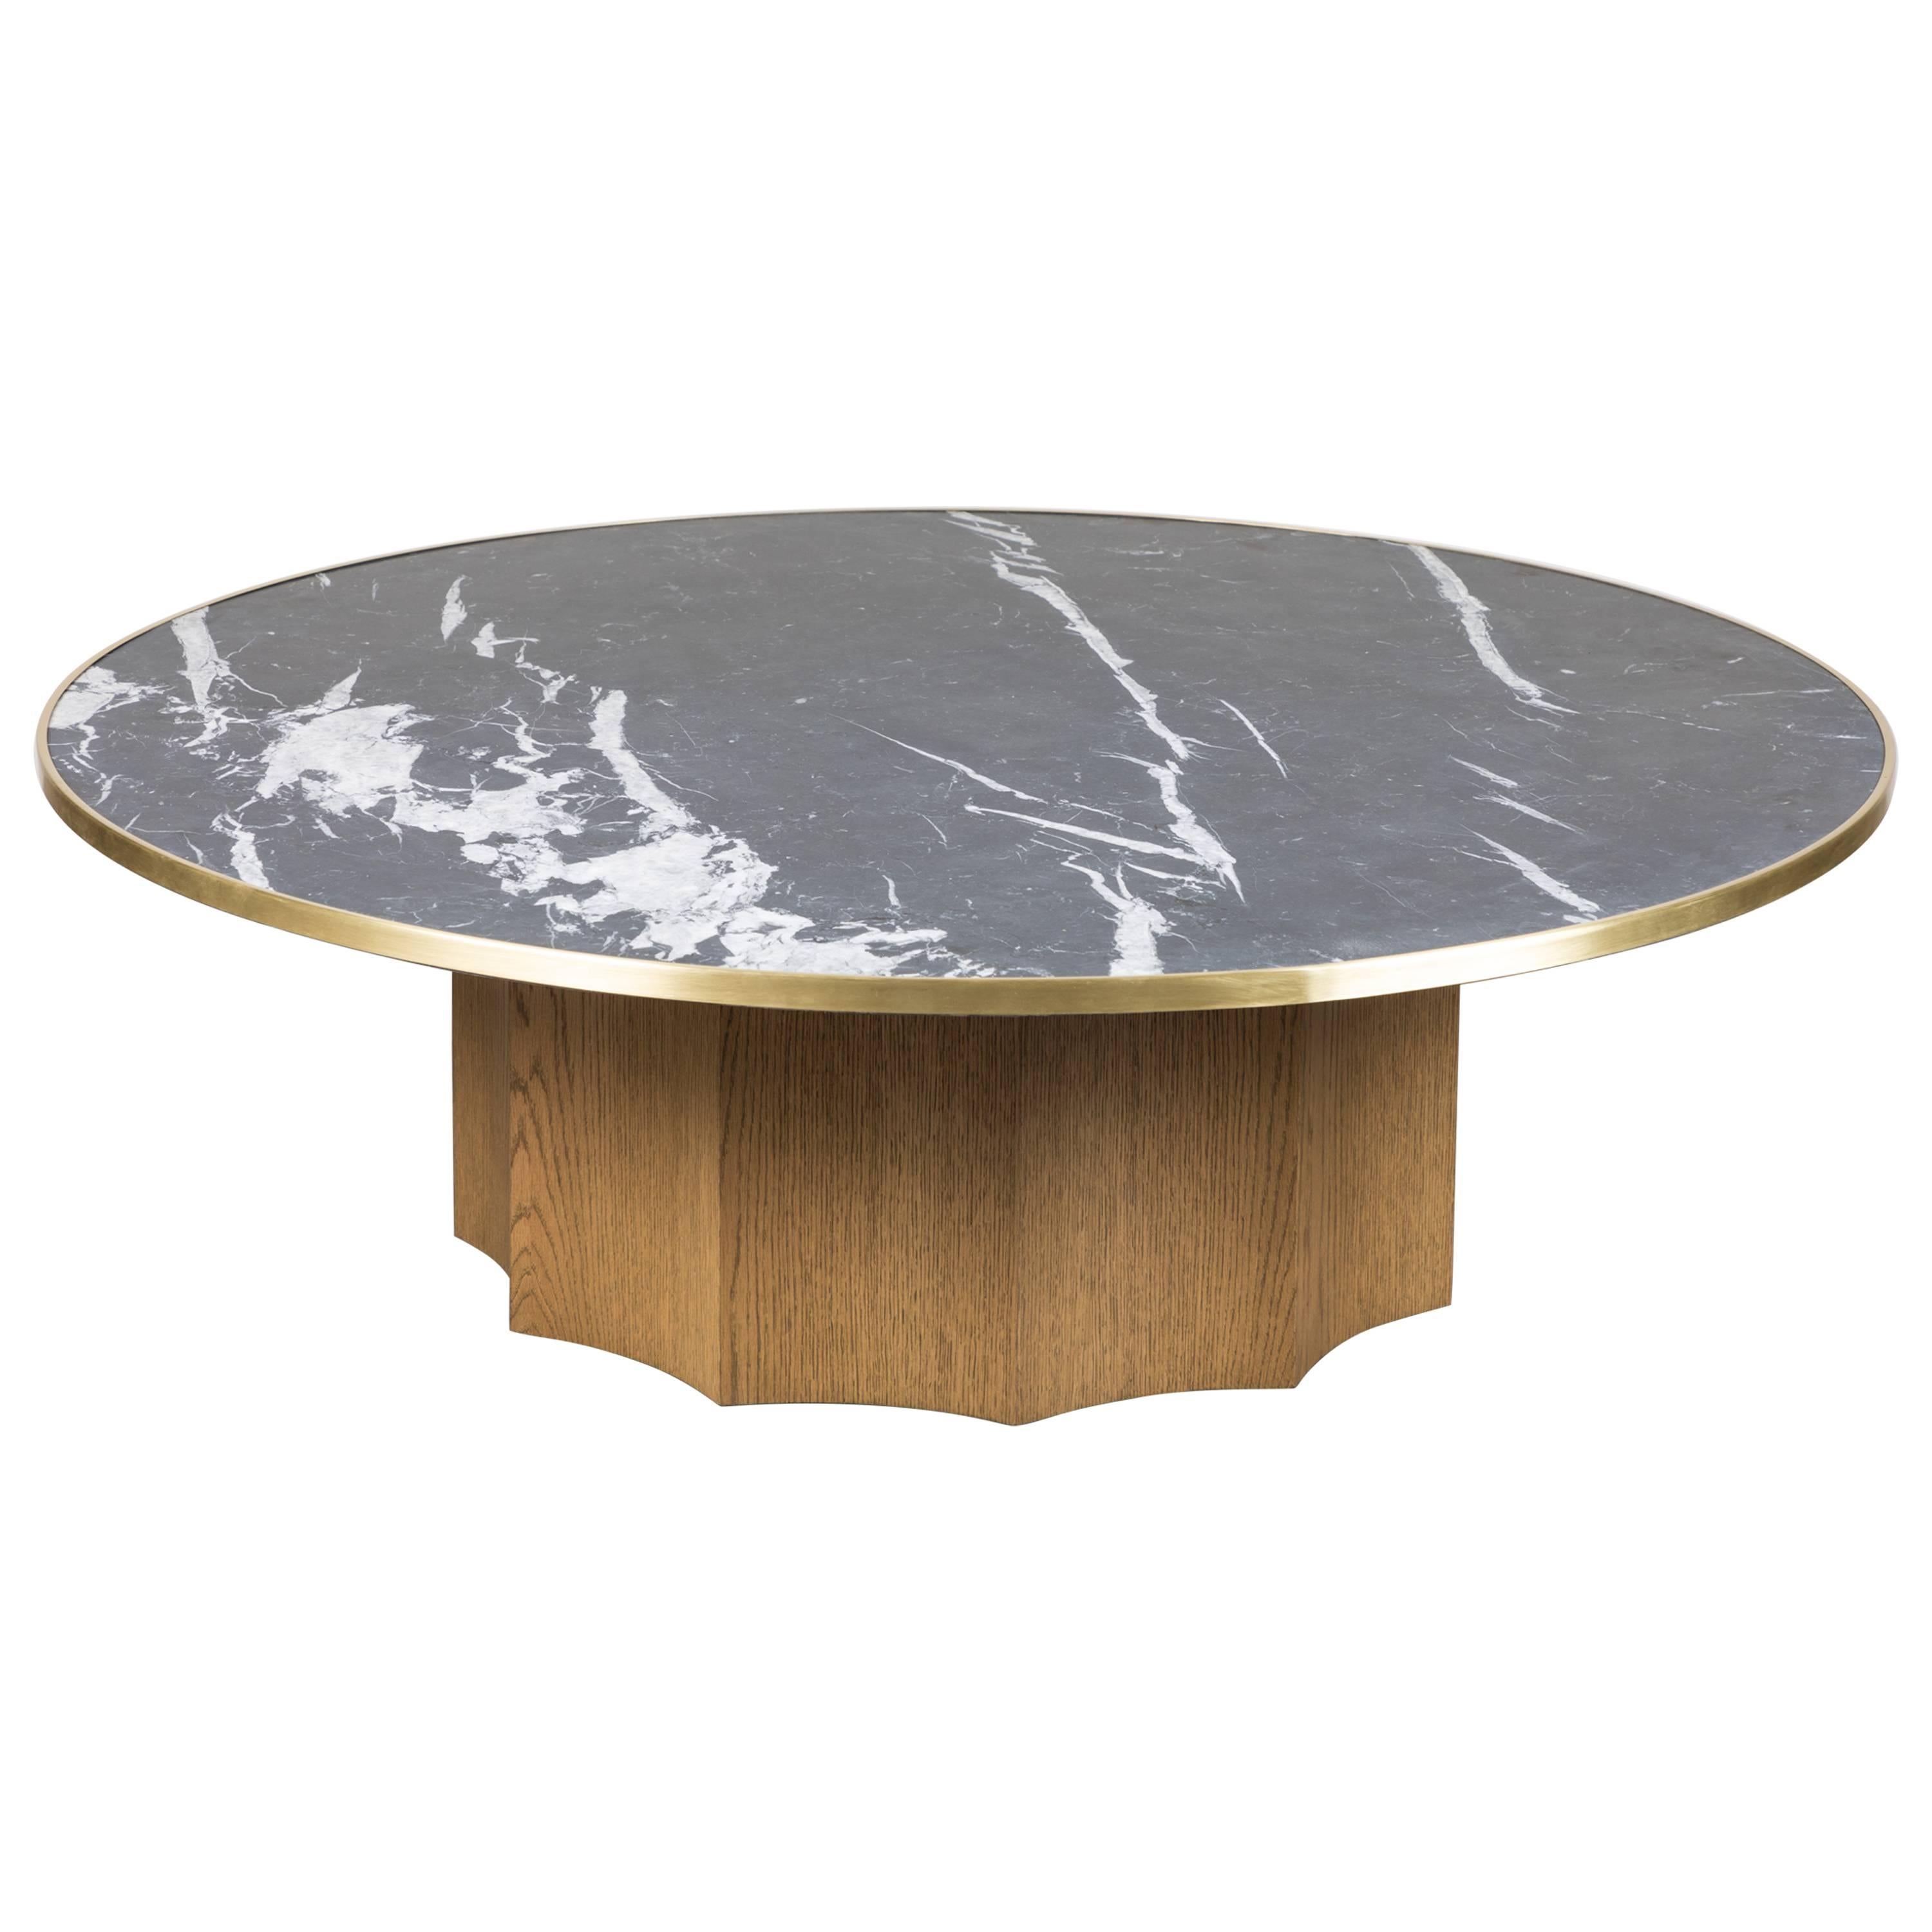 Normandie Coffee Table 48" by Lawson-Fenning